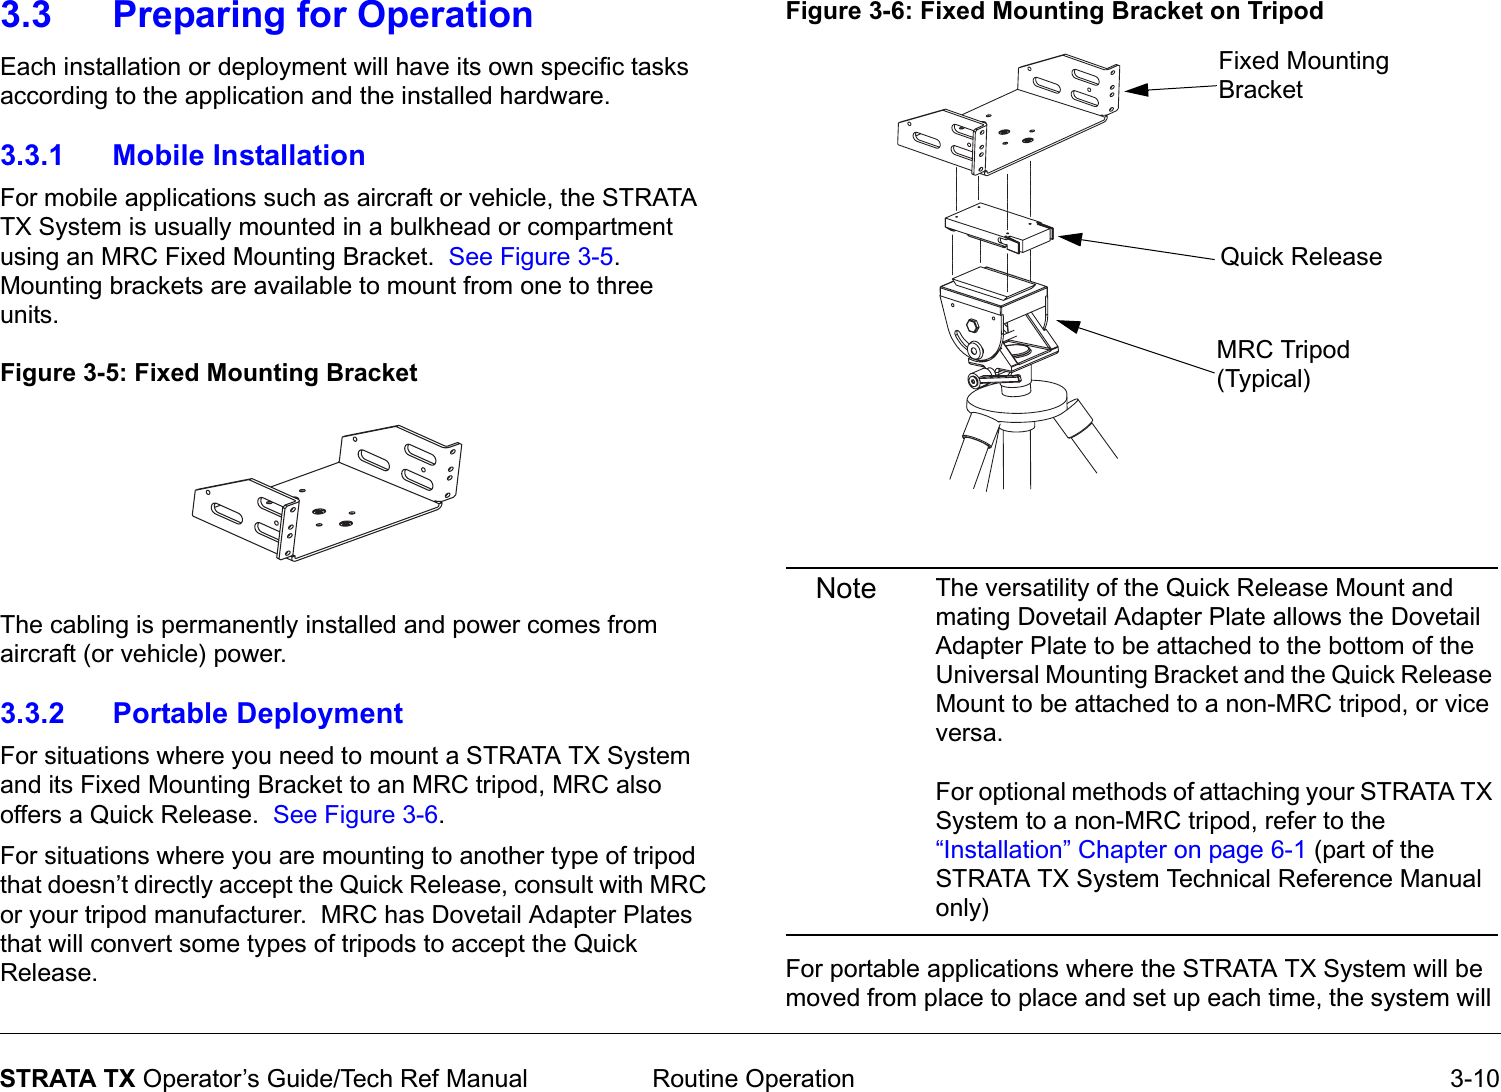  Routine Operation 3-10STRATA TX Operator’s Guide/Tech Ref Manual3.3 Preparing for OperationEach installation or deployment will have its own specific tasks according to the application and the installed hardware.  3.3.1 Mobile InstallationFor mobile applications such as aircraft or vehicle, the STRATA TX System is usually mounted in a bulkhead or compartment using an MRC Fixed Mounting Bracket.  See Figure 3-5.  Mounting brackets are available to mount from one to three units.  Figure 3-5: Fixed Mounting BracketThe cabling is permanently installed and power comes from aircraft (or vehicle) power.3.3.2 Portable DeploymentFor situations where you need to mount a STRATA TX System and its Fixed Mounting Bracket to an MRC tripod, MRC also offers a Quick Release.  See Figure 3-6.For situations where you are mounting to another type of tripod that doesn’t directly accept the Quick Release, consult with MRC or your tripod manufacturer.  MRC has Dovetail Adapter Plates that will convert some types of tripods to accept the Quick Release.Figure 3-6: Fixed Mounting Bracket on TripodNote The versatility of the Quick Release Mount and mating Dovetail Adapter Plate allows the Dovetail Adapter Plate to be attached to the bottom of the Universal Mounting Bracket and the Quick Release Mount to be attached to a non-MRC tripod, or vice versa.For optional methods of attaching your STRATA TX System to a non-MRC tripod, refer to the “Installation” Chapter on page 6-1 (part of the STRATA TX System Technical Reference Manual only) For portable applications where the STRATA TX System will be moved from place to place and set up each time, the system will Fixed Mounting BracketQuick ReleaseMRC Tripod (Typical)